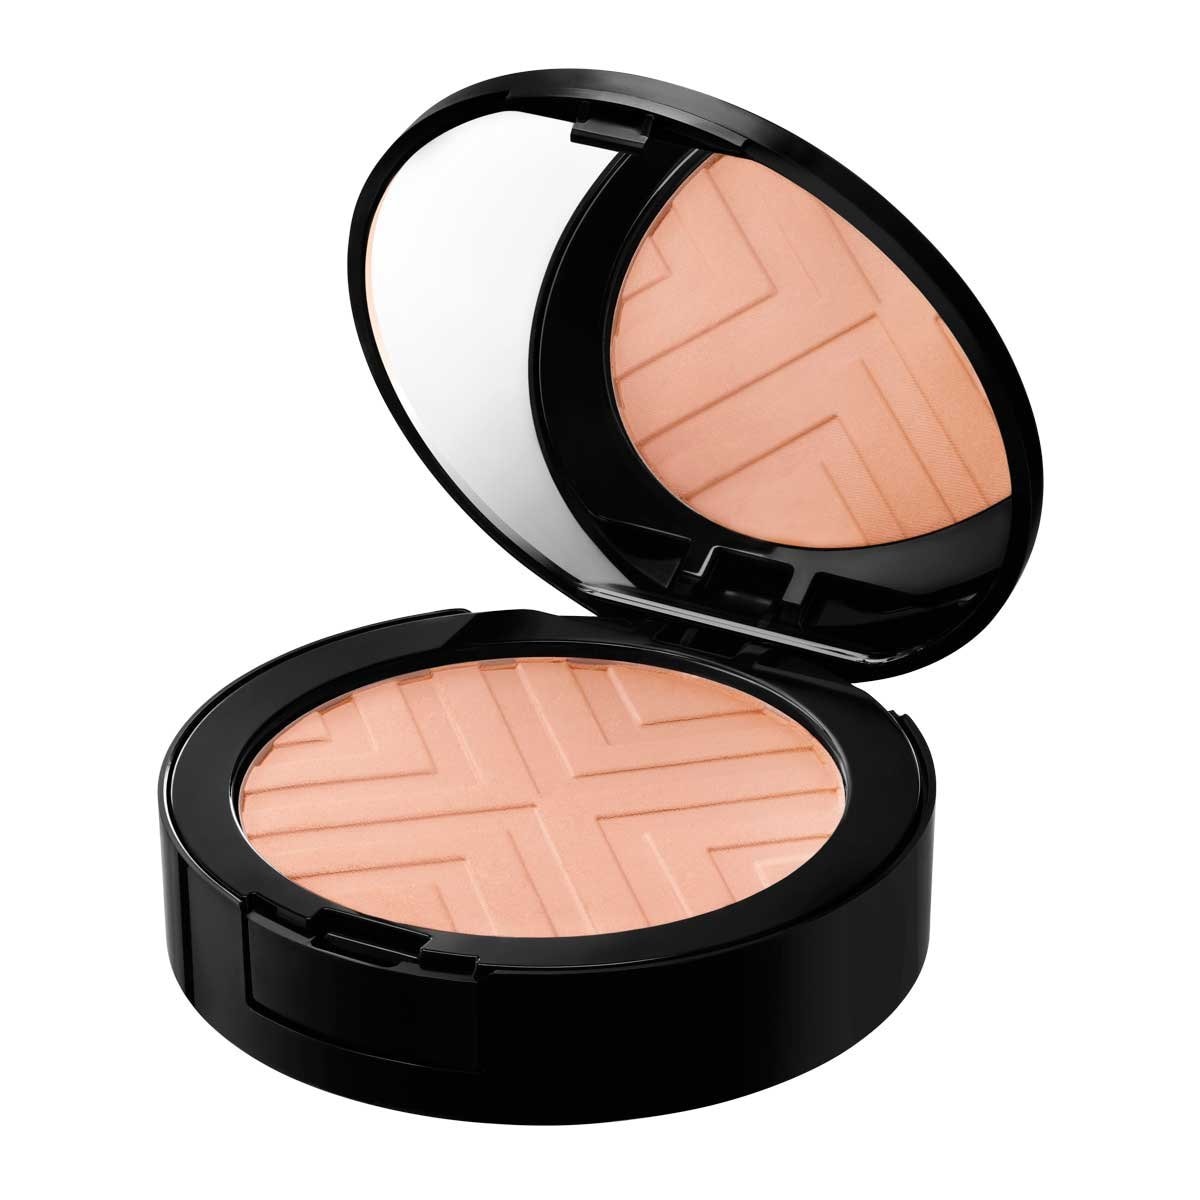 Dermablend Polvo Compacto Covermatte T55 9.5 G Vichy